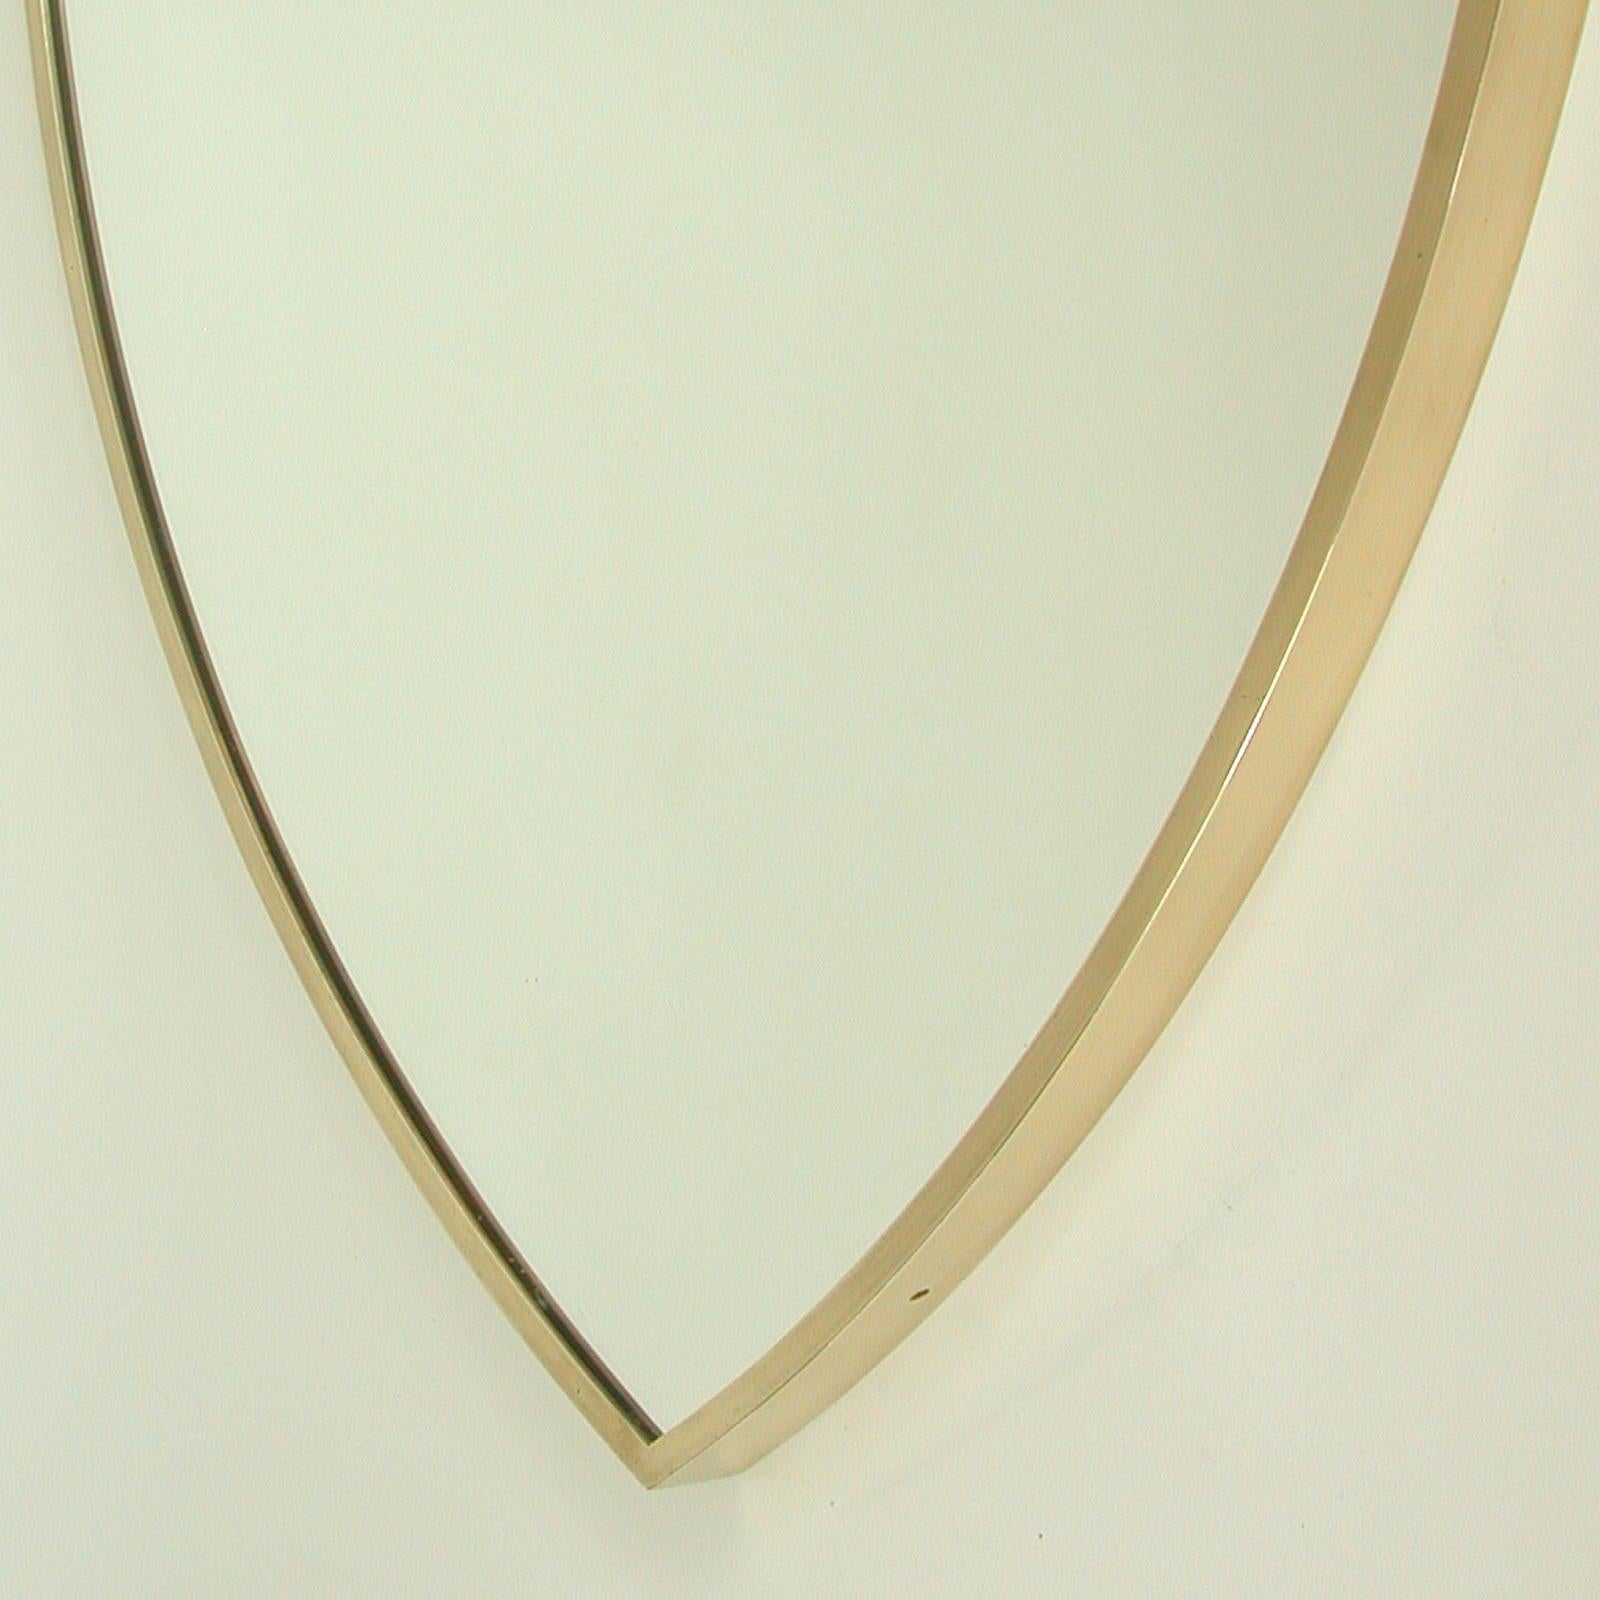 Italian Midcentury Brass Shield Shaped Wall Mirror, Gio Ponti Style, Italy 1950s For Sale